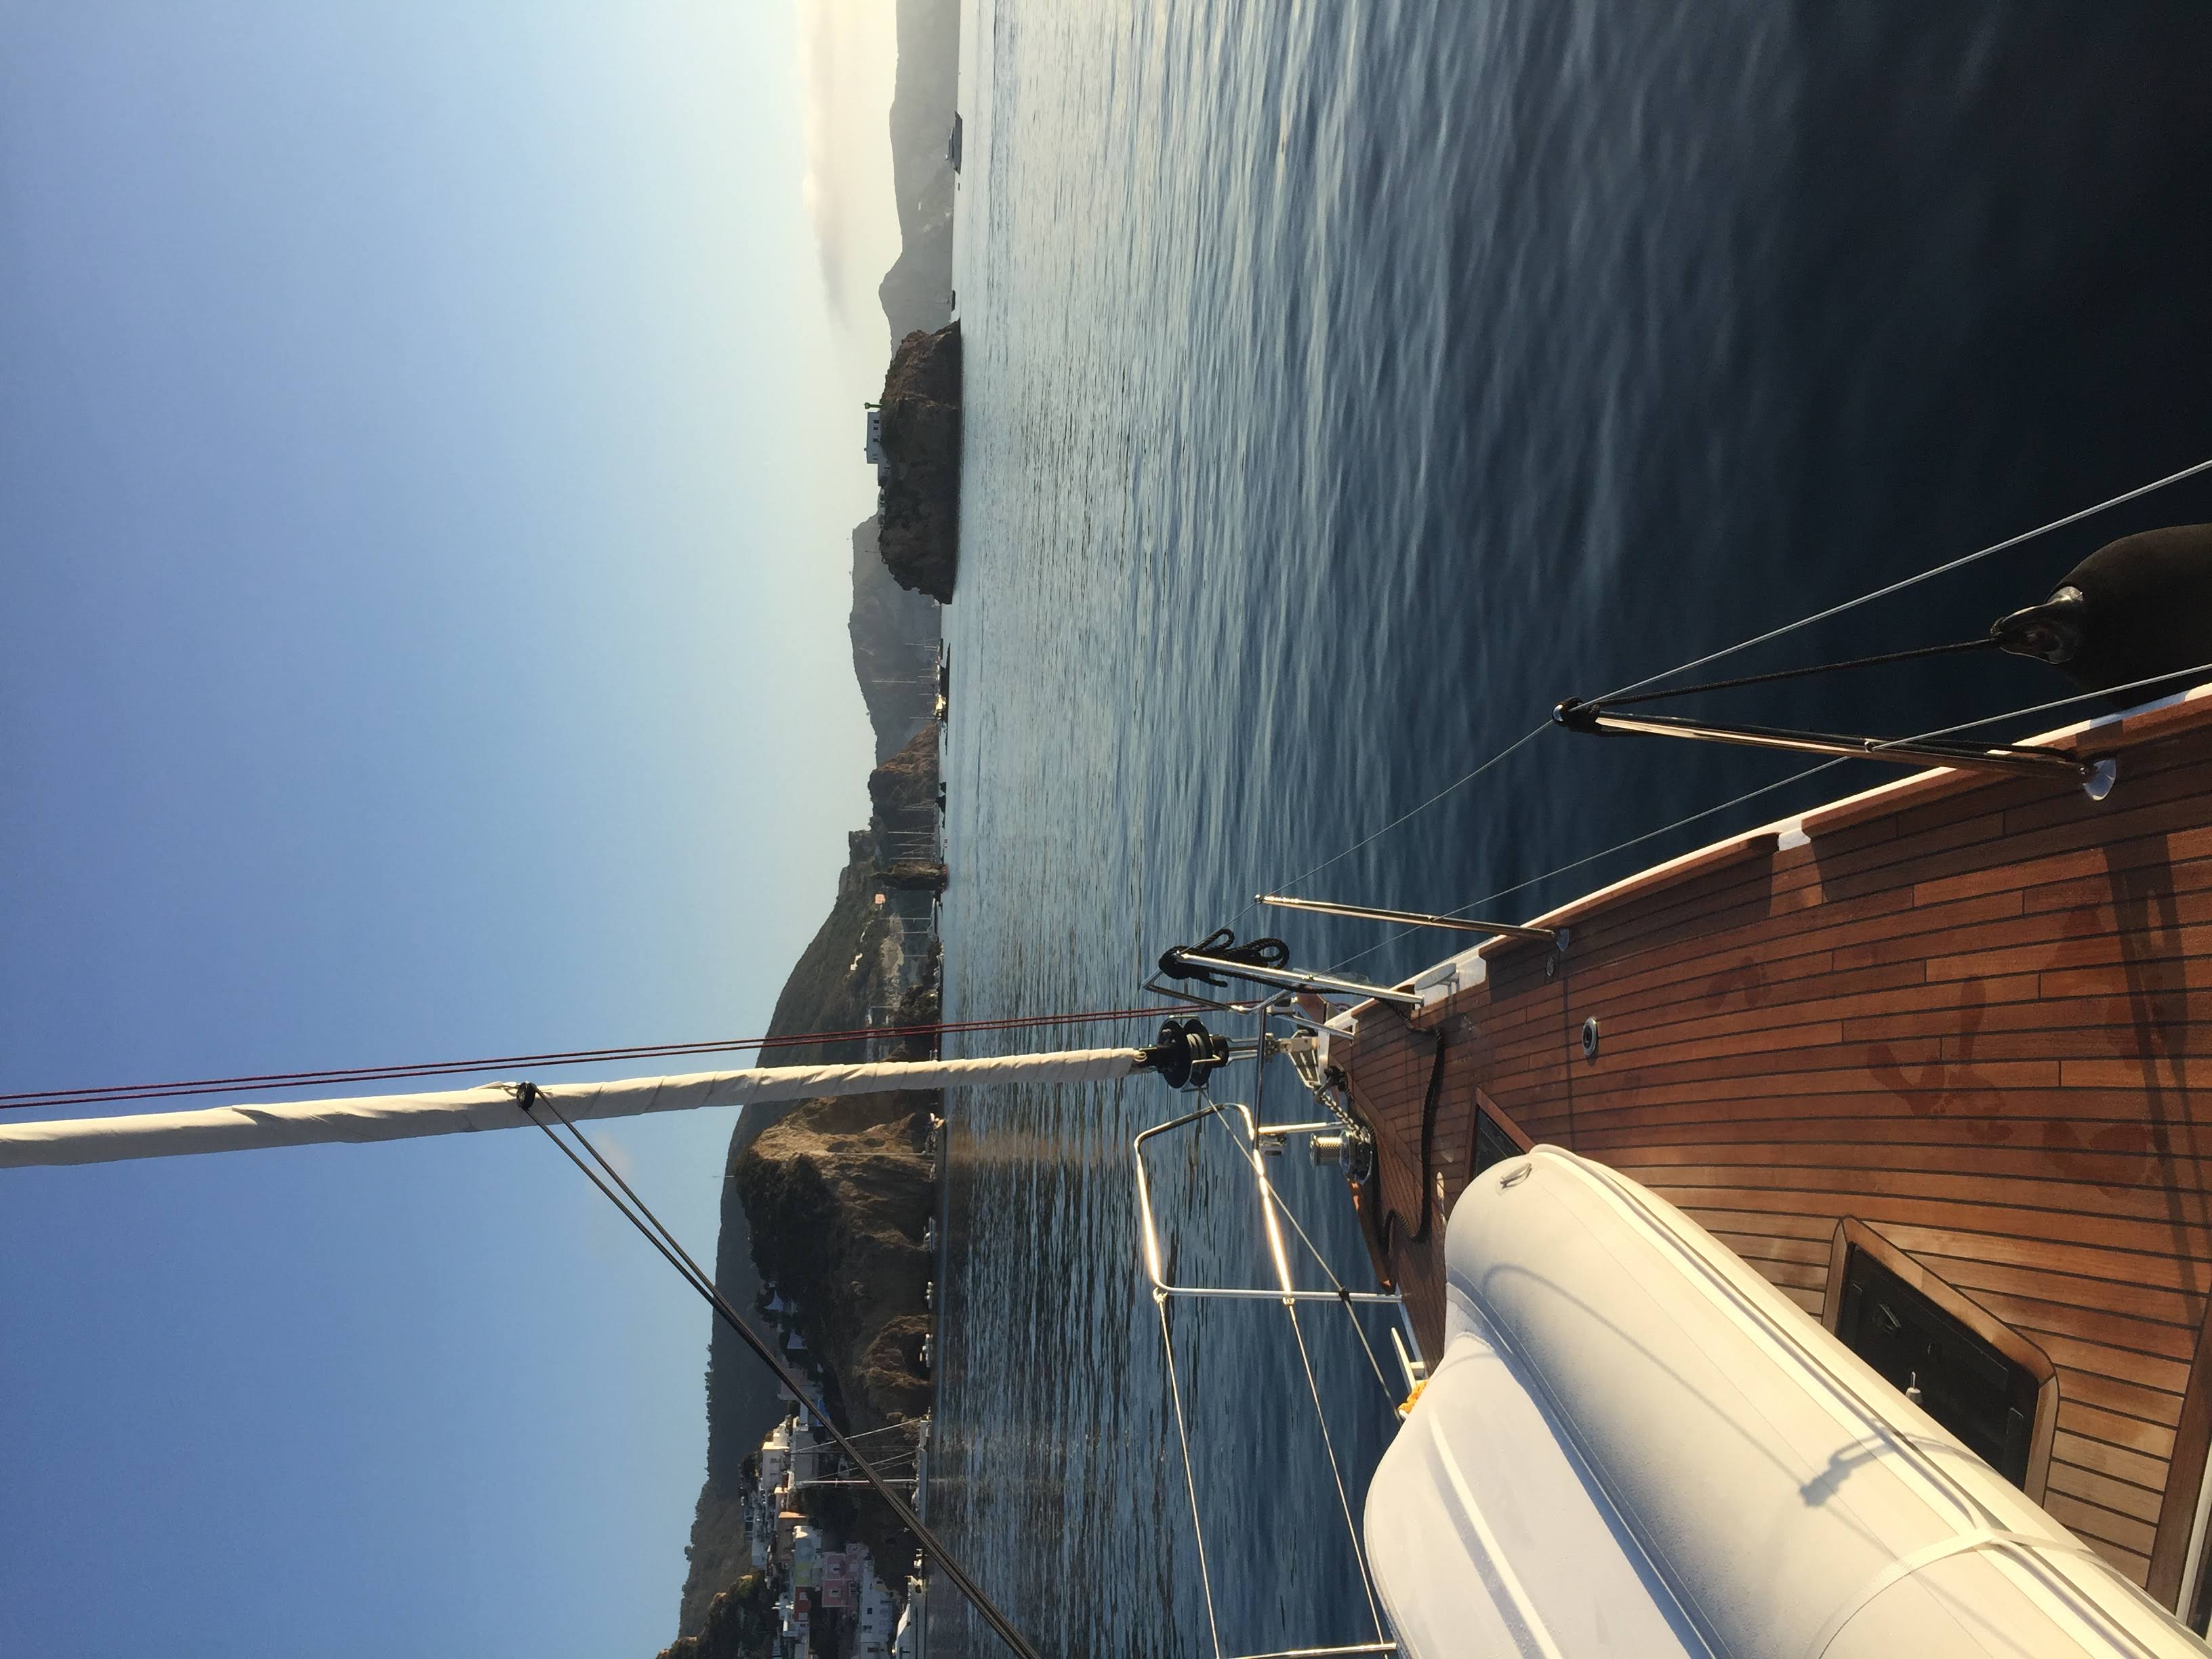 Oceanis 55.1 - Alimos Yacht Charter & Boat hire in Greece Athens and Saronic Gulf Athens Alimos Alimos Marina 6